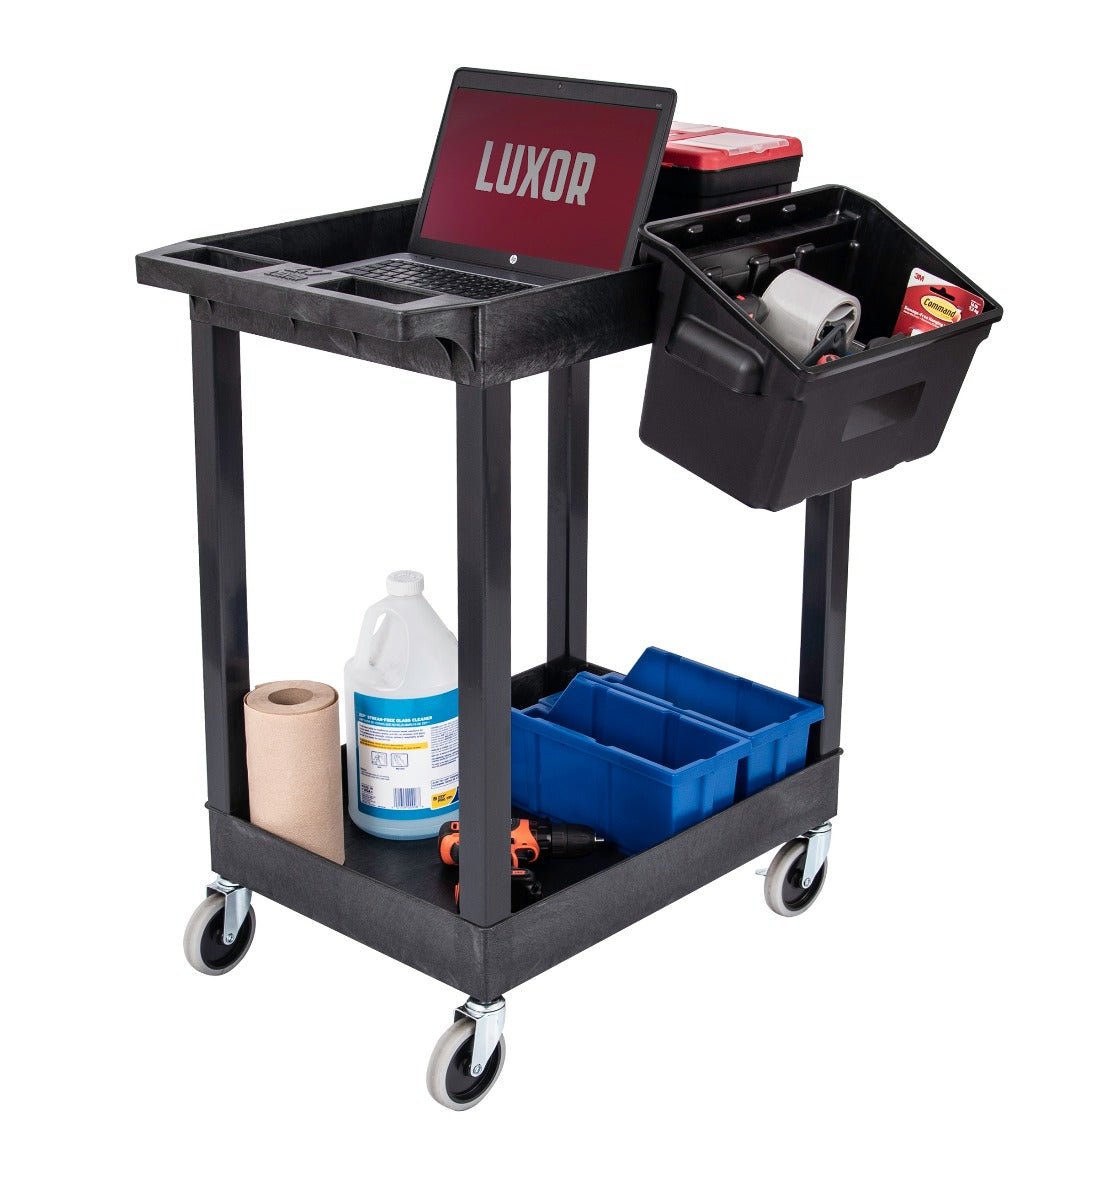 Luxor 24" x 18" Plastic Utility Tub Cart - Two Shelves with Outrigger Utility Cart Bins (Luxor LUX-SEC11-B-OUTRIG) - SchoolOutlet